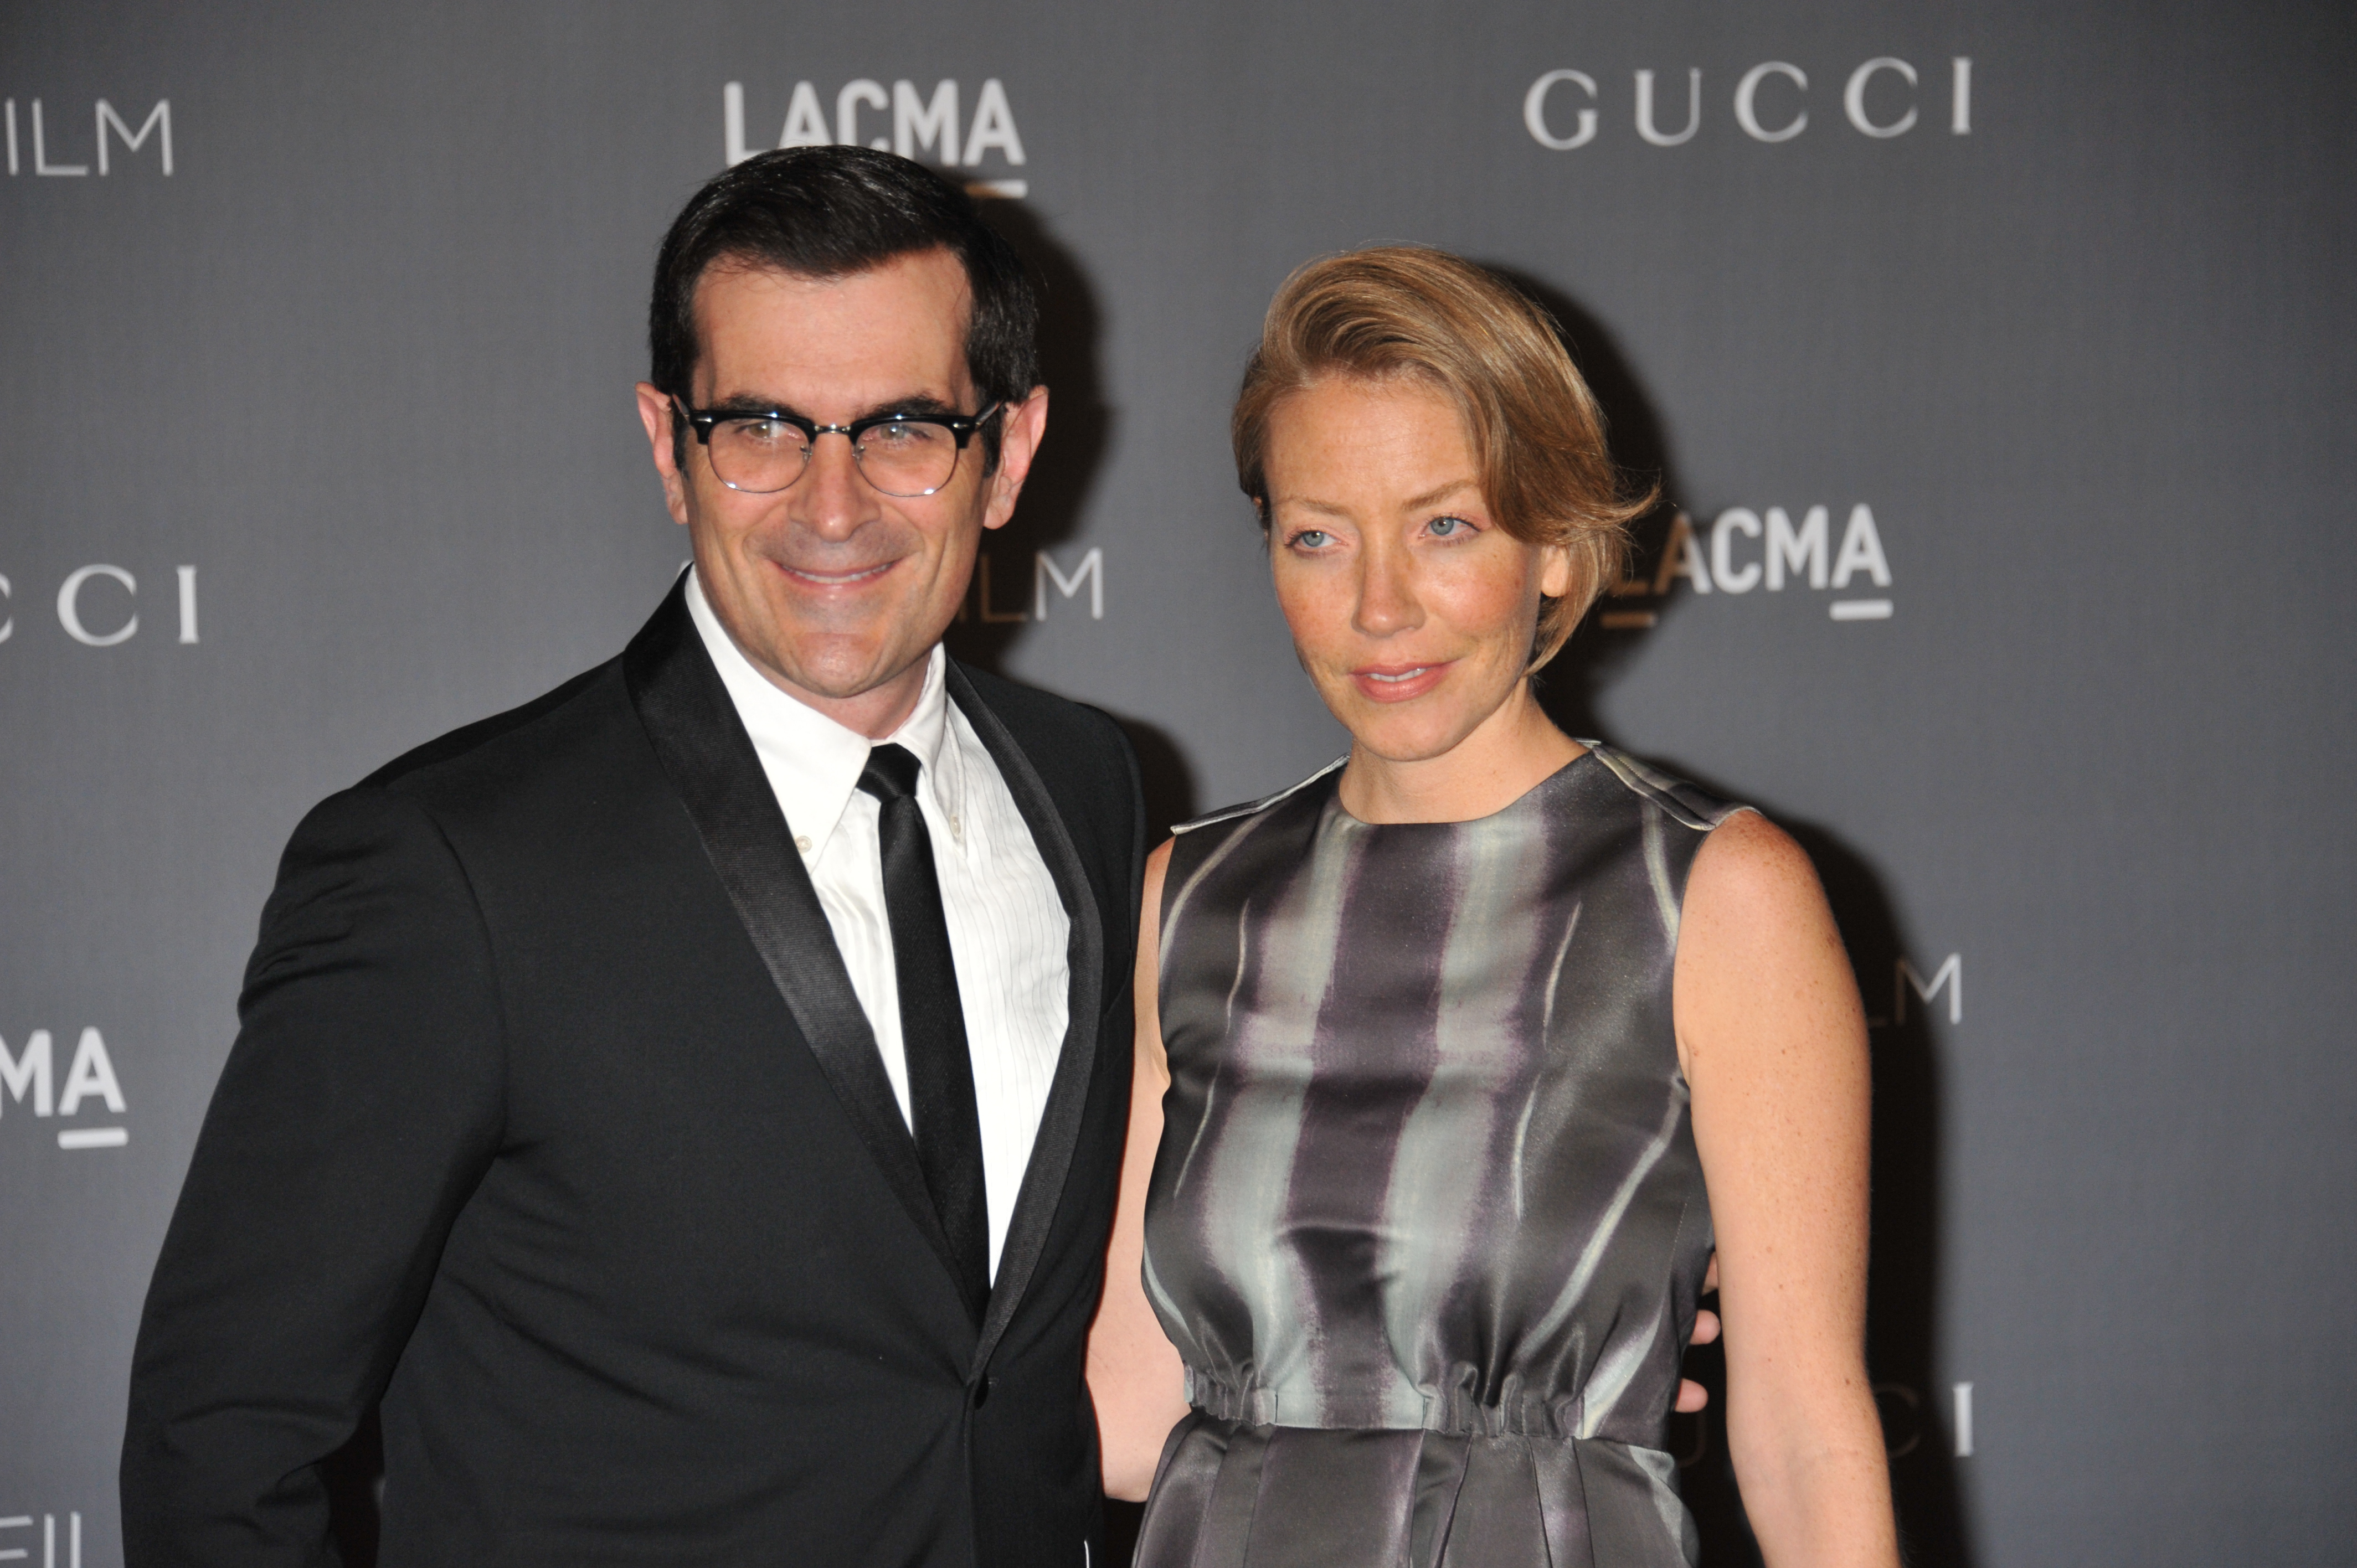 Ty Burrell and his wife Holly at LACMA Art + Film Gala on October 27, 2012 | Source: Getty Images